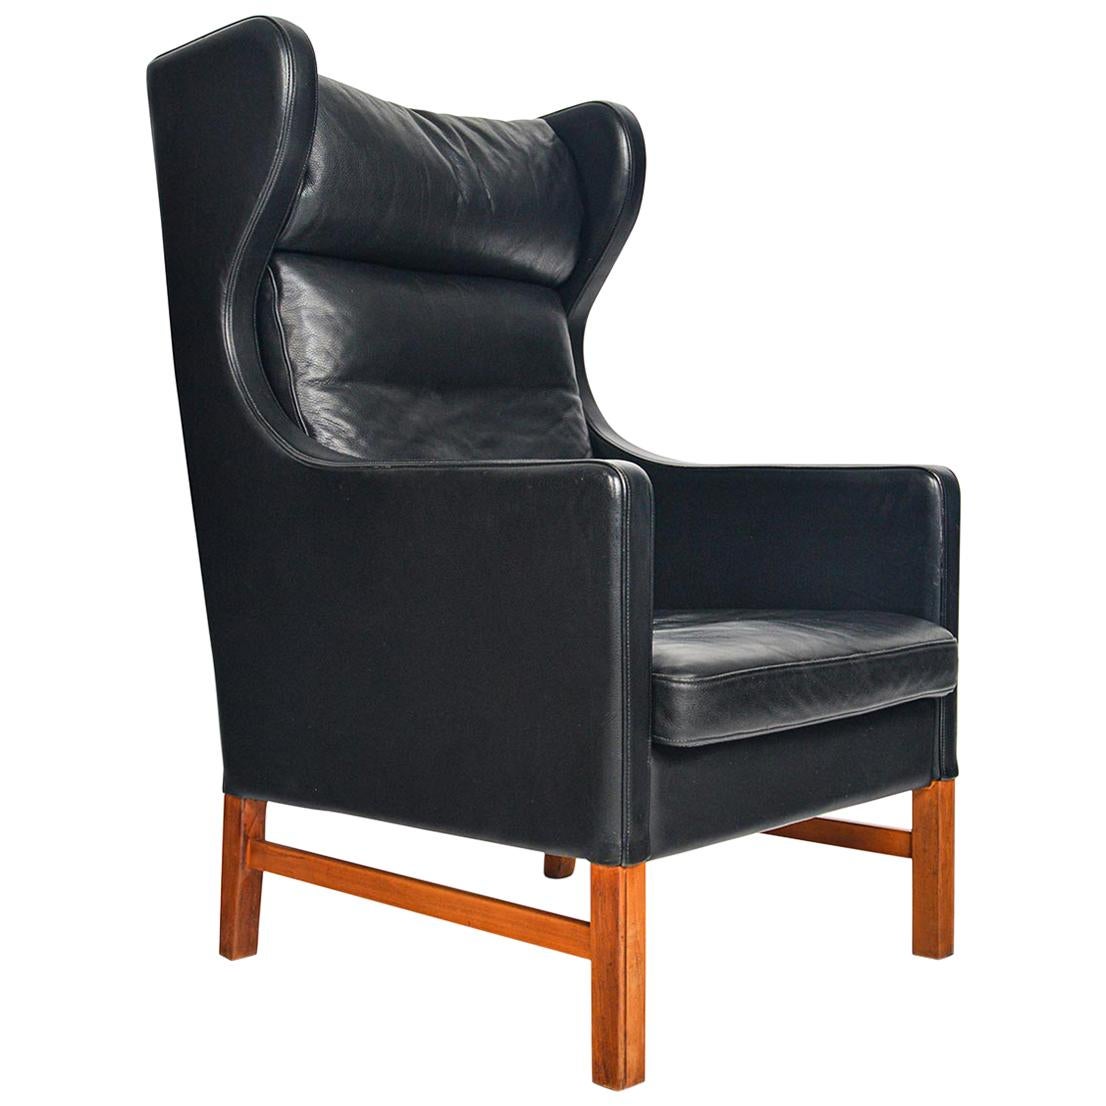 Highback Black Leather Lounge Chair by Skipper Møbler